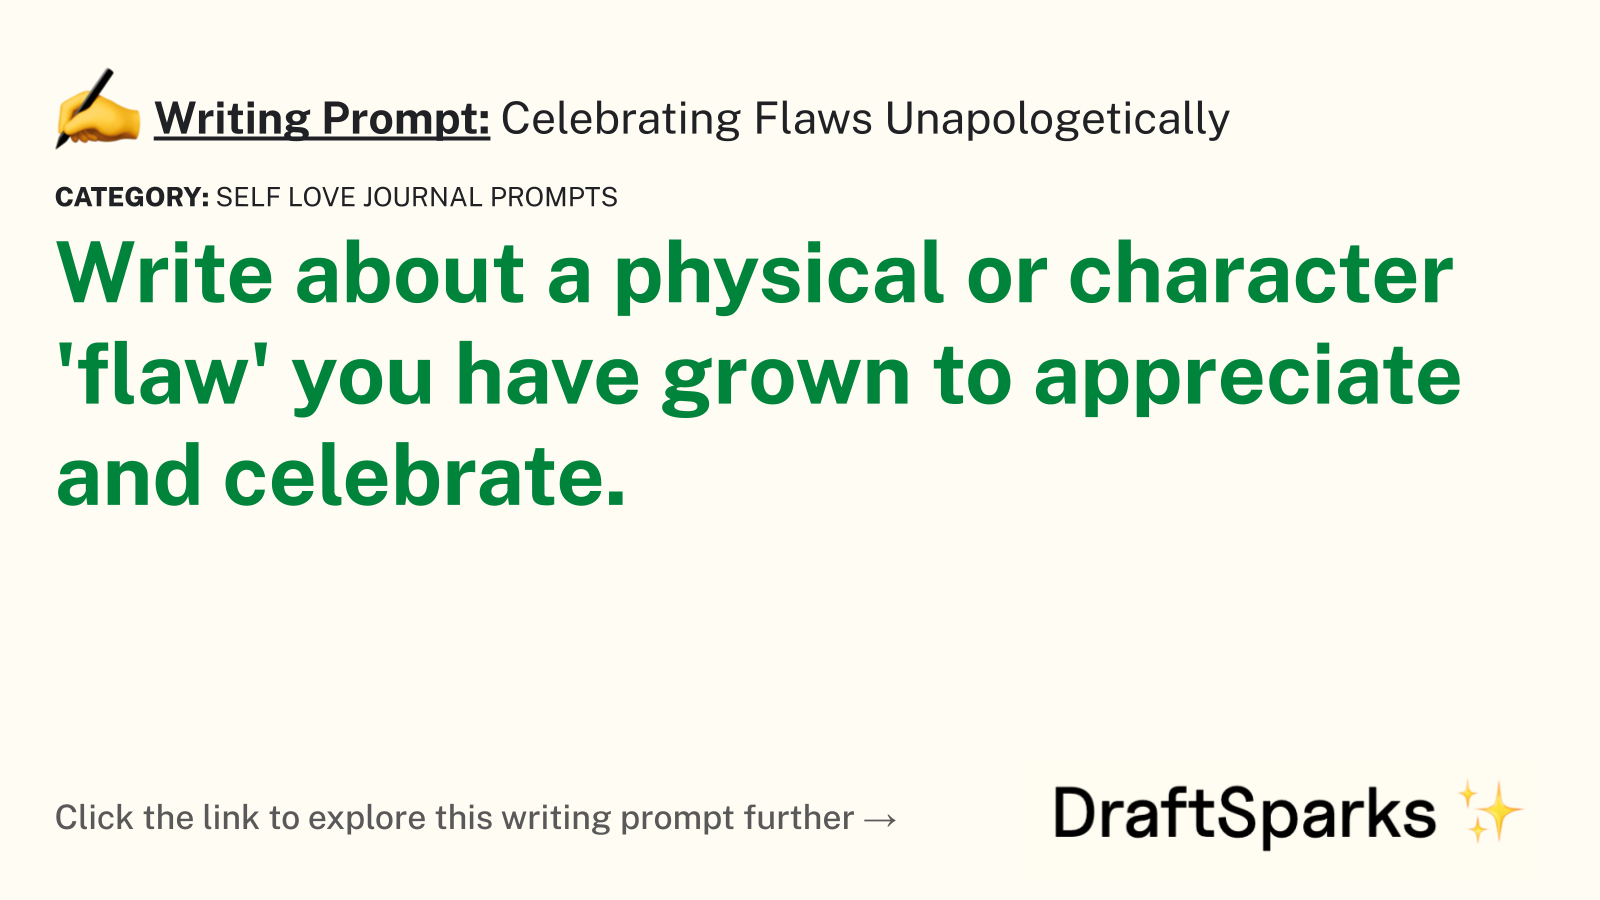 Celebrating Flaws Unapologetically